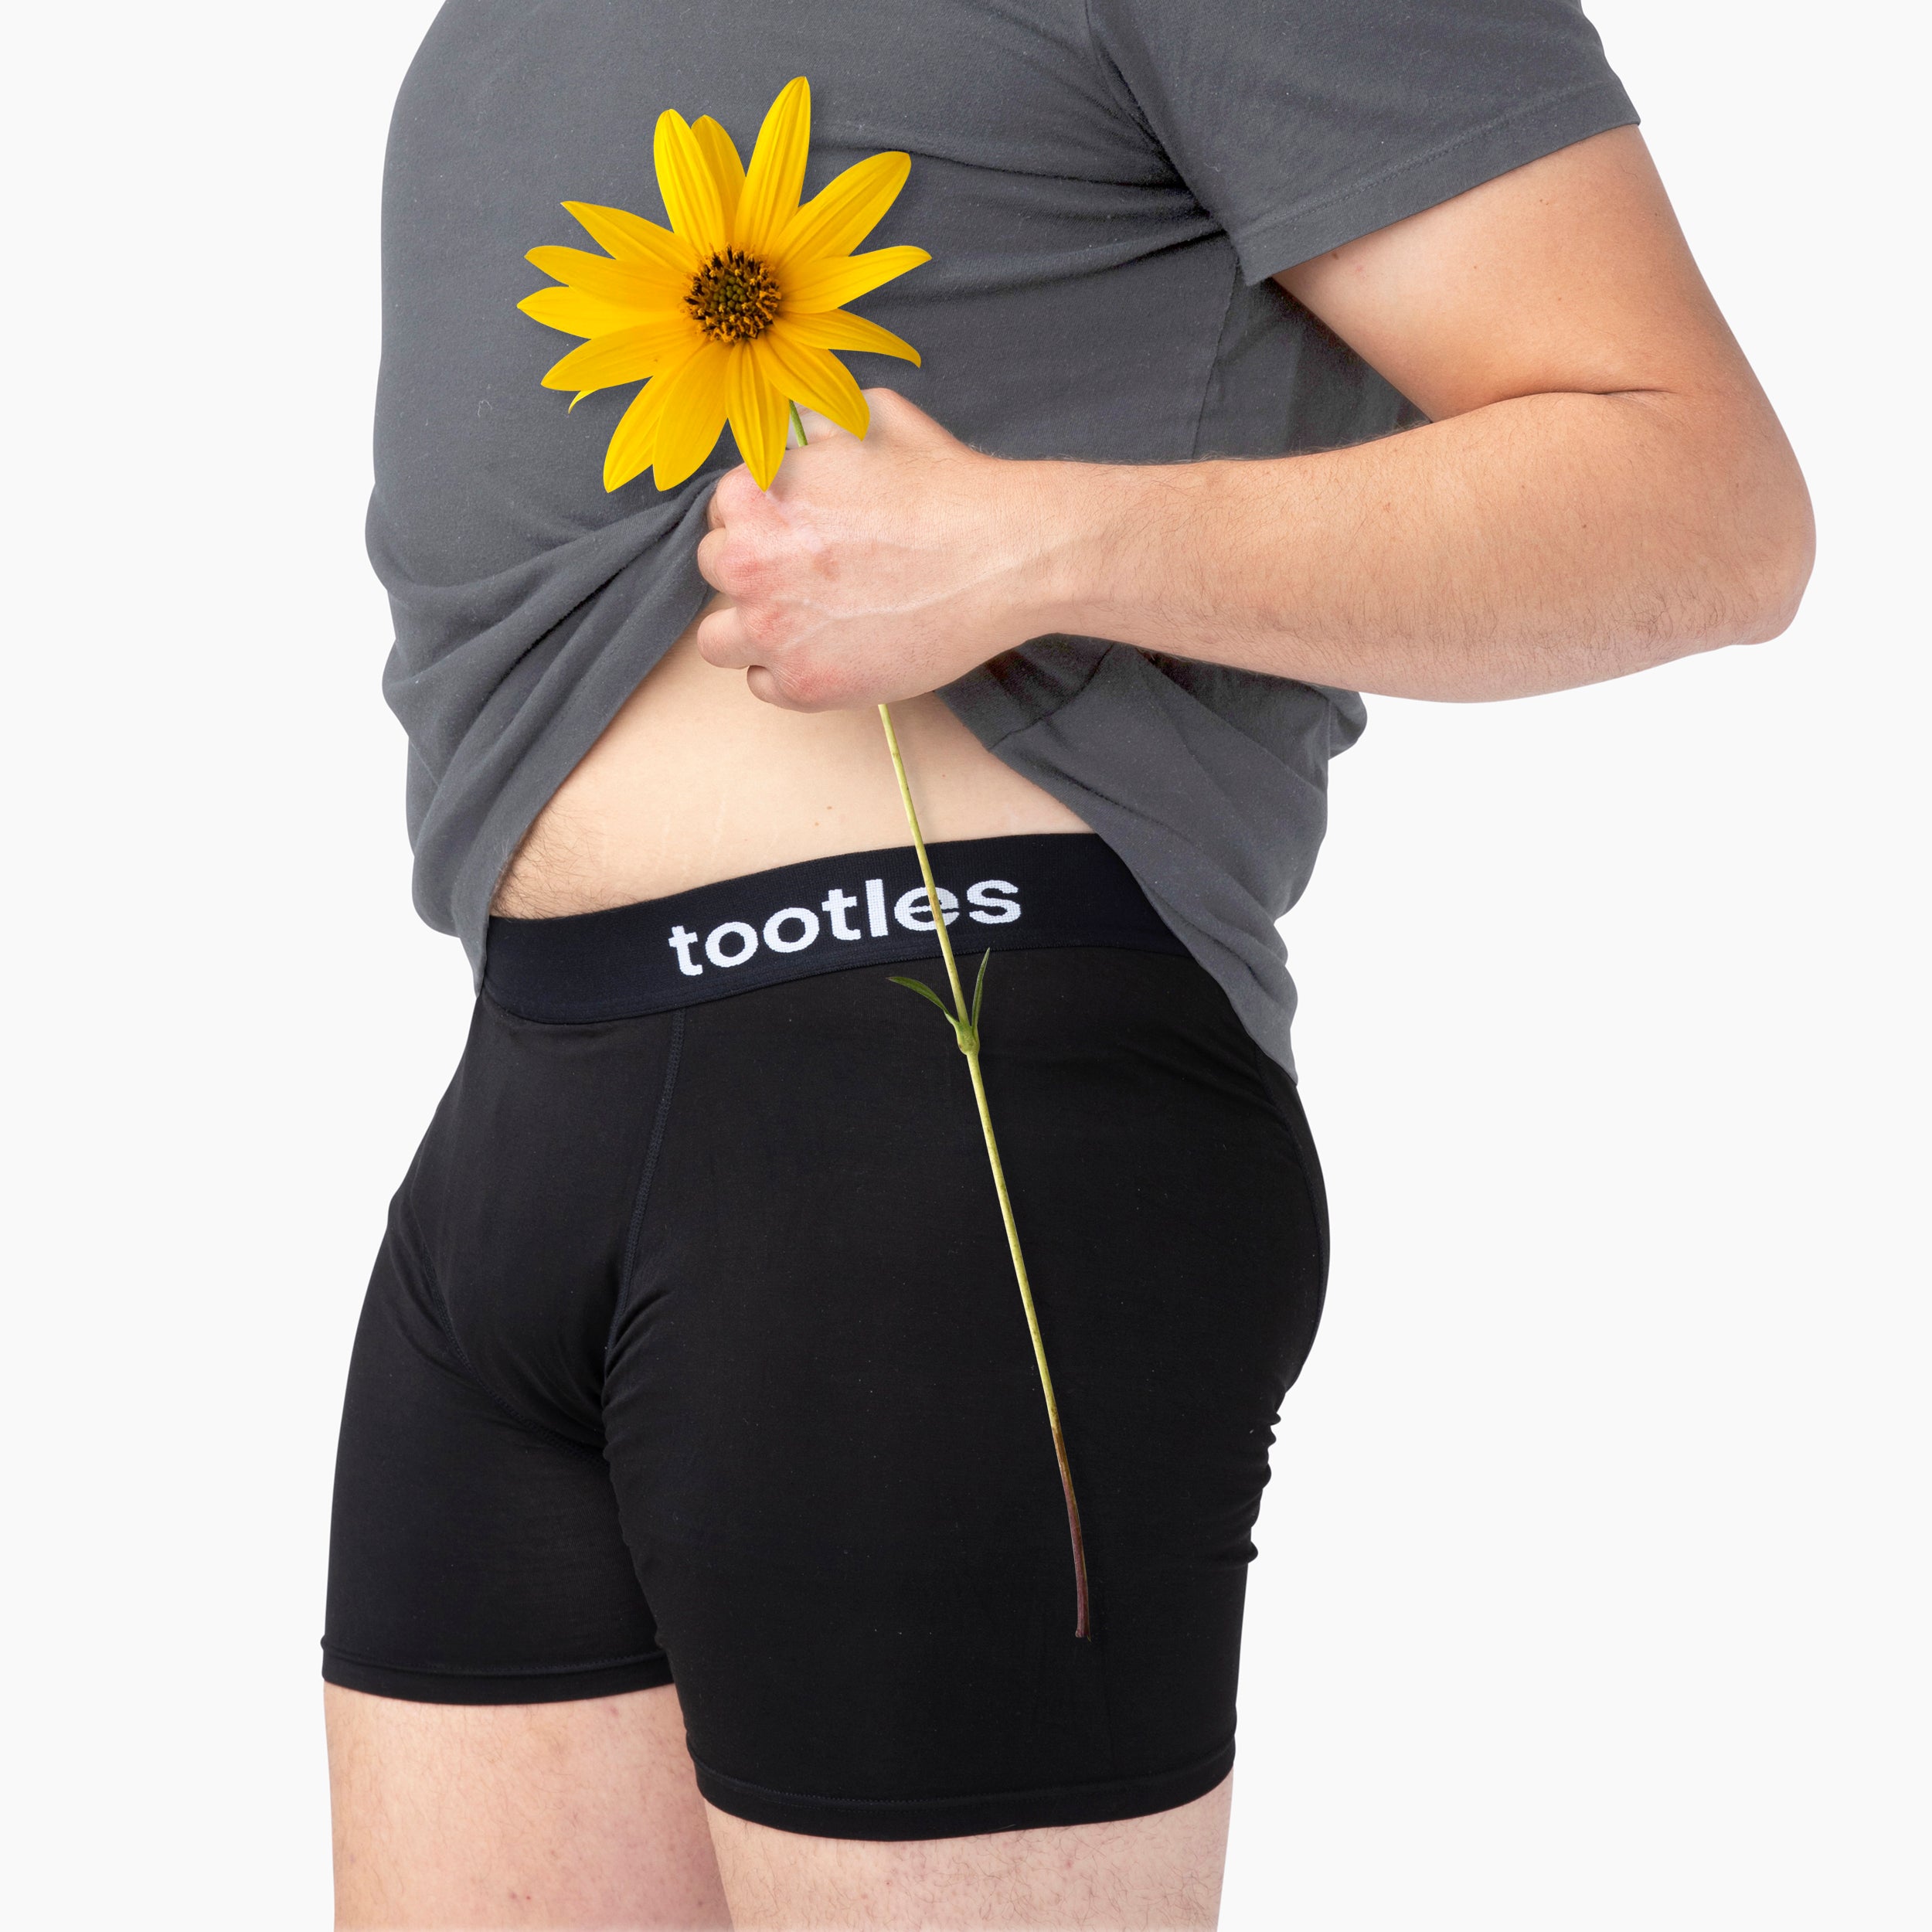 Tootles Fart Filtering Underwear - Hip Hugger Style  Smelly gas 💨 from  time to time? Tootles underwear has your back, a fart filtering underwear  that purifies the air using a comfortable